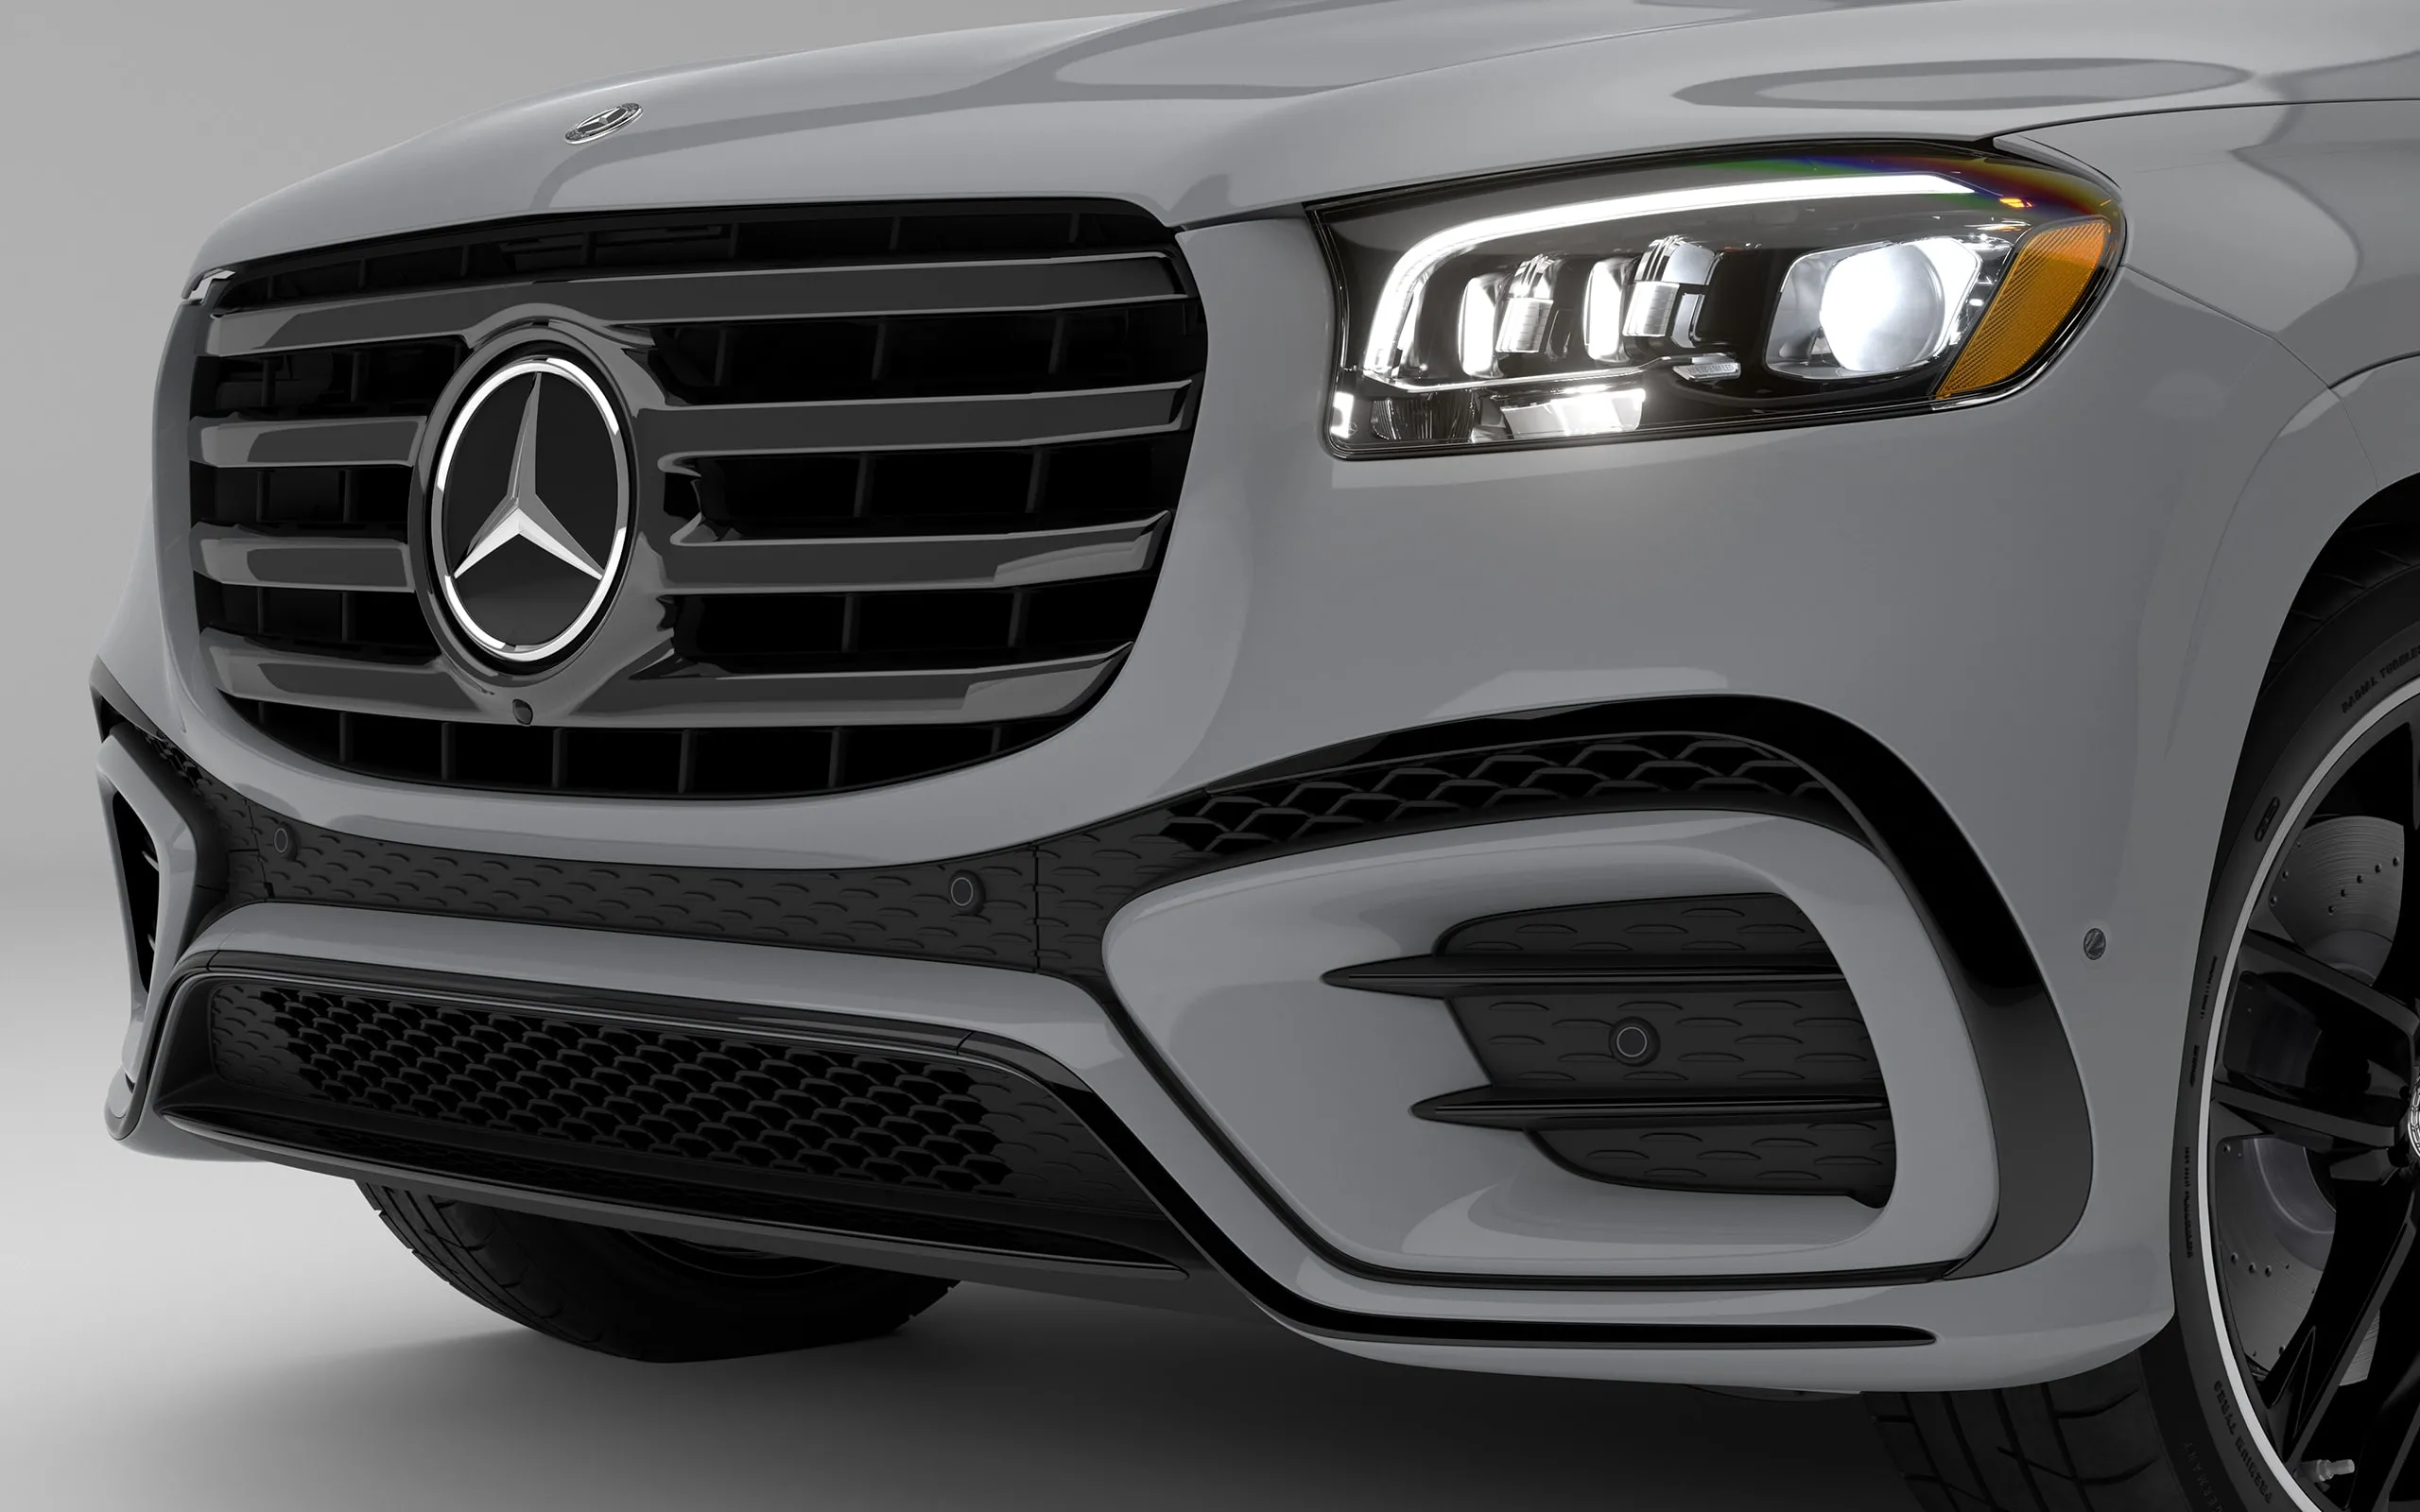 What Are the Mercedes-Benz SUV Models?